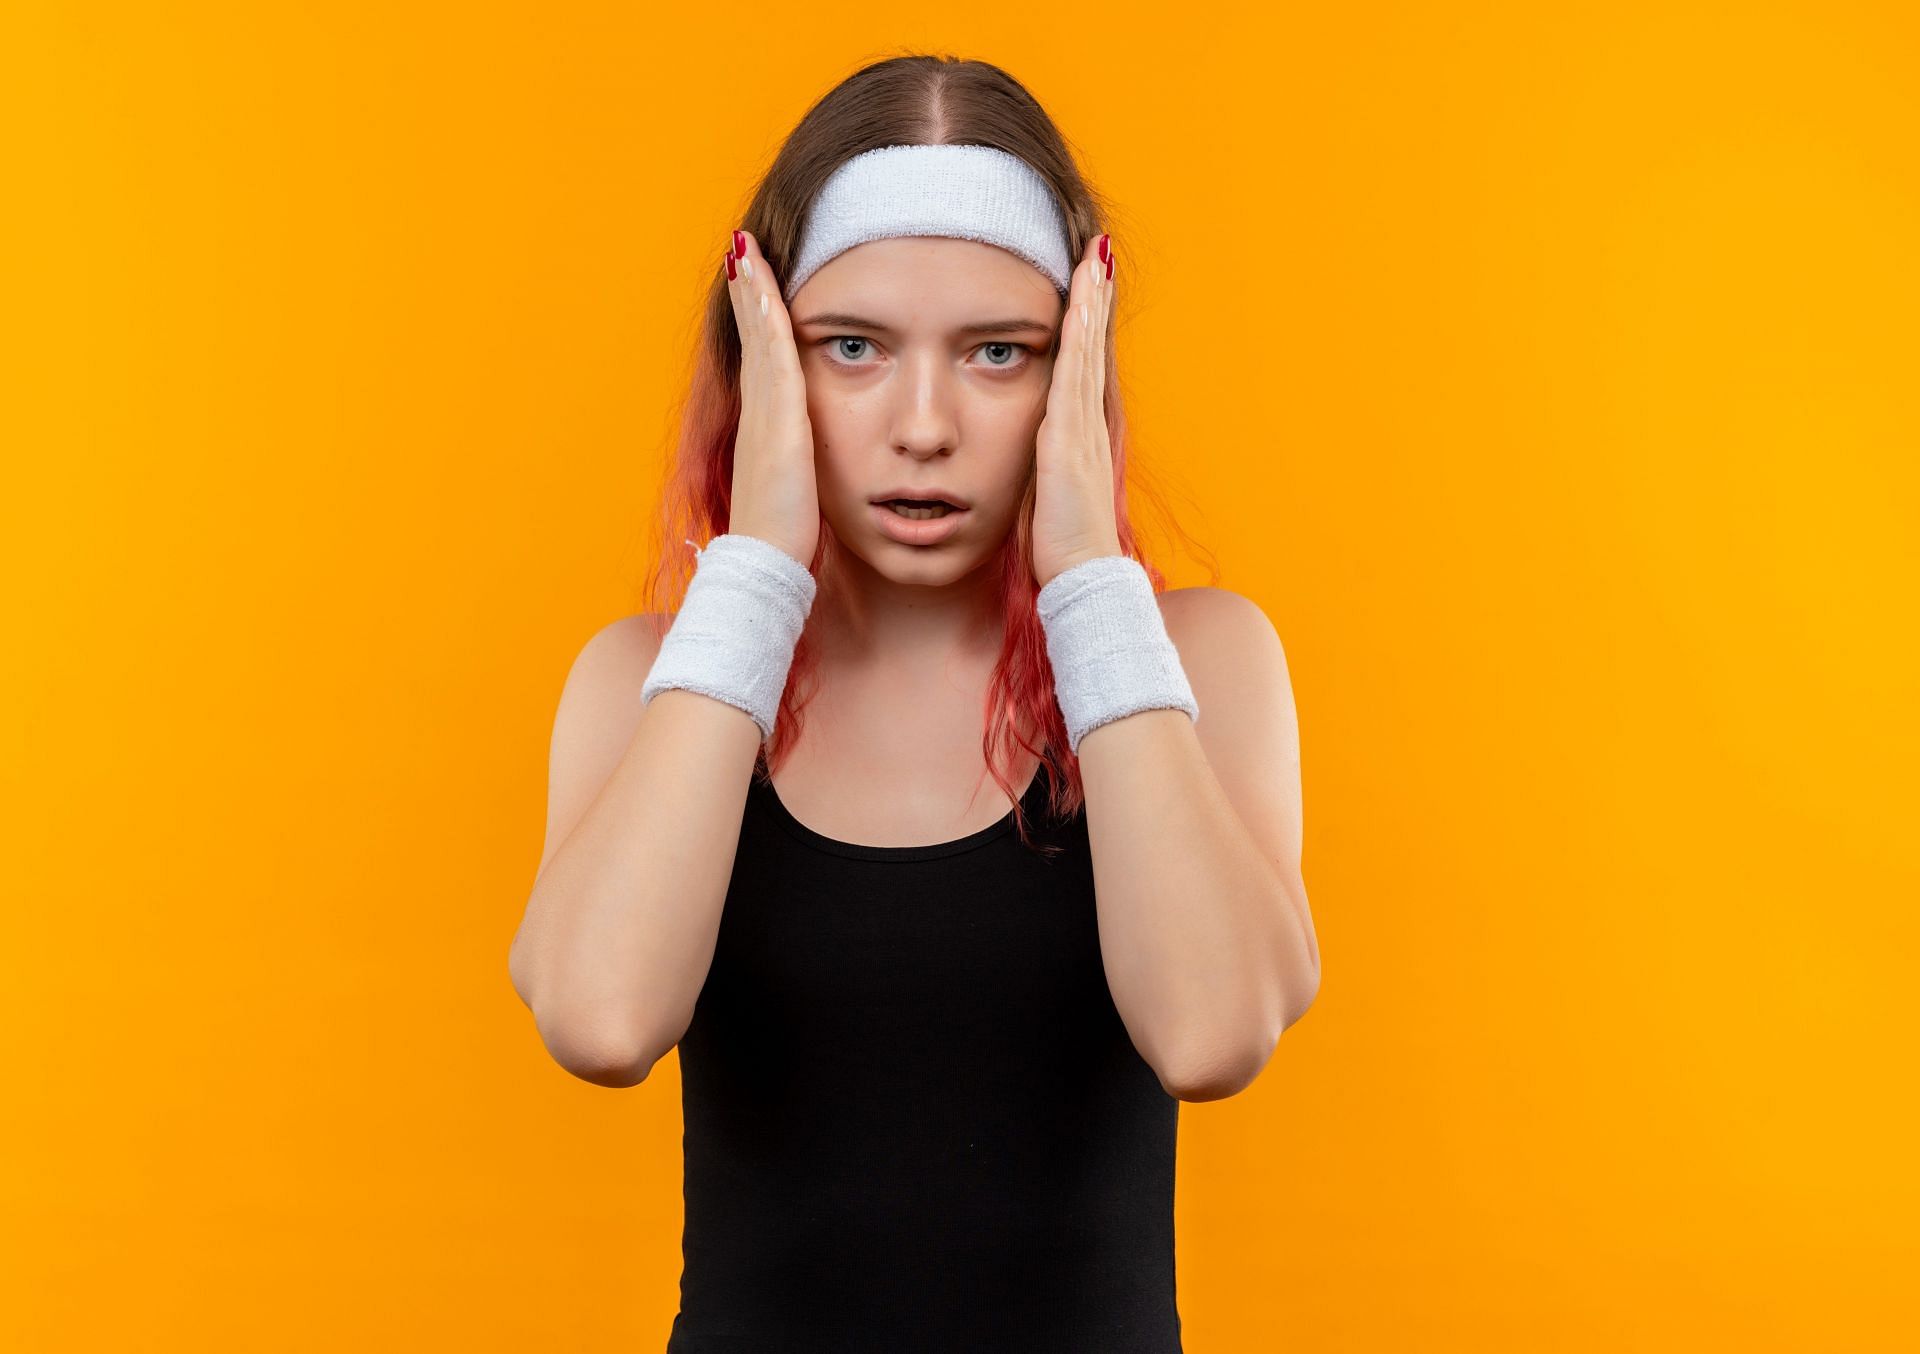 Have you ever experienced gym anxiety? You are not the only one. (Image via Freepik/ Freepik)